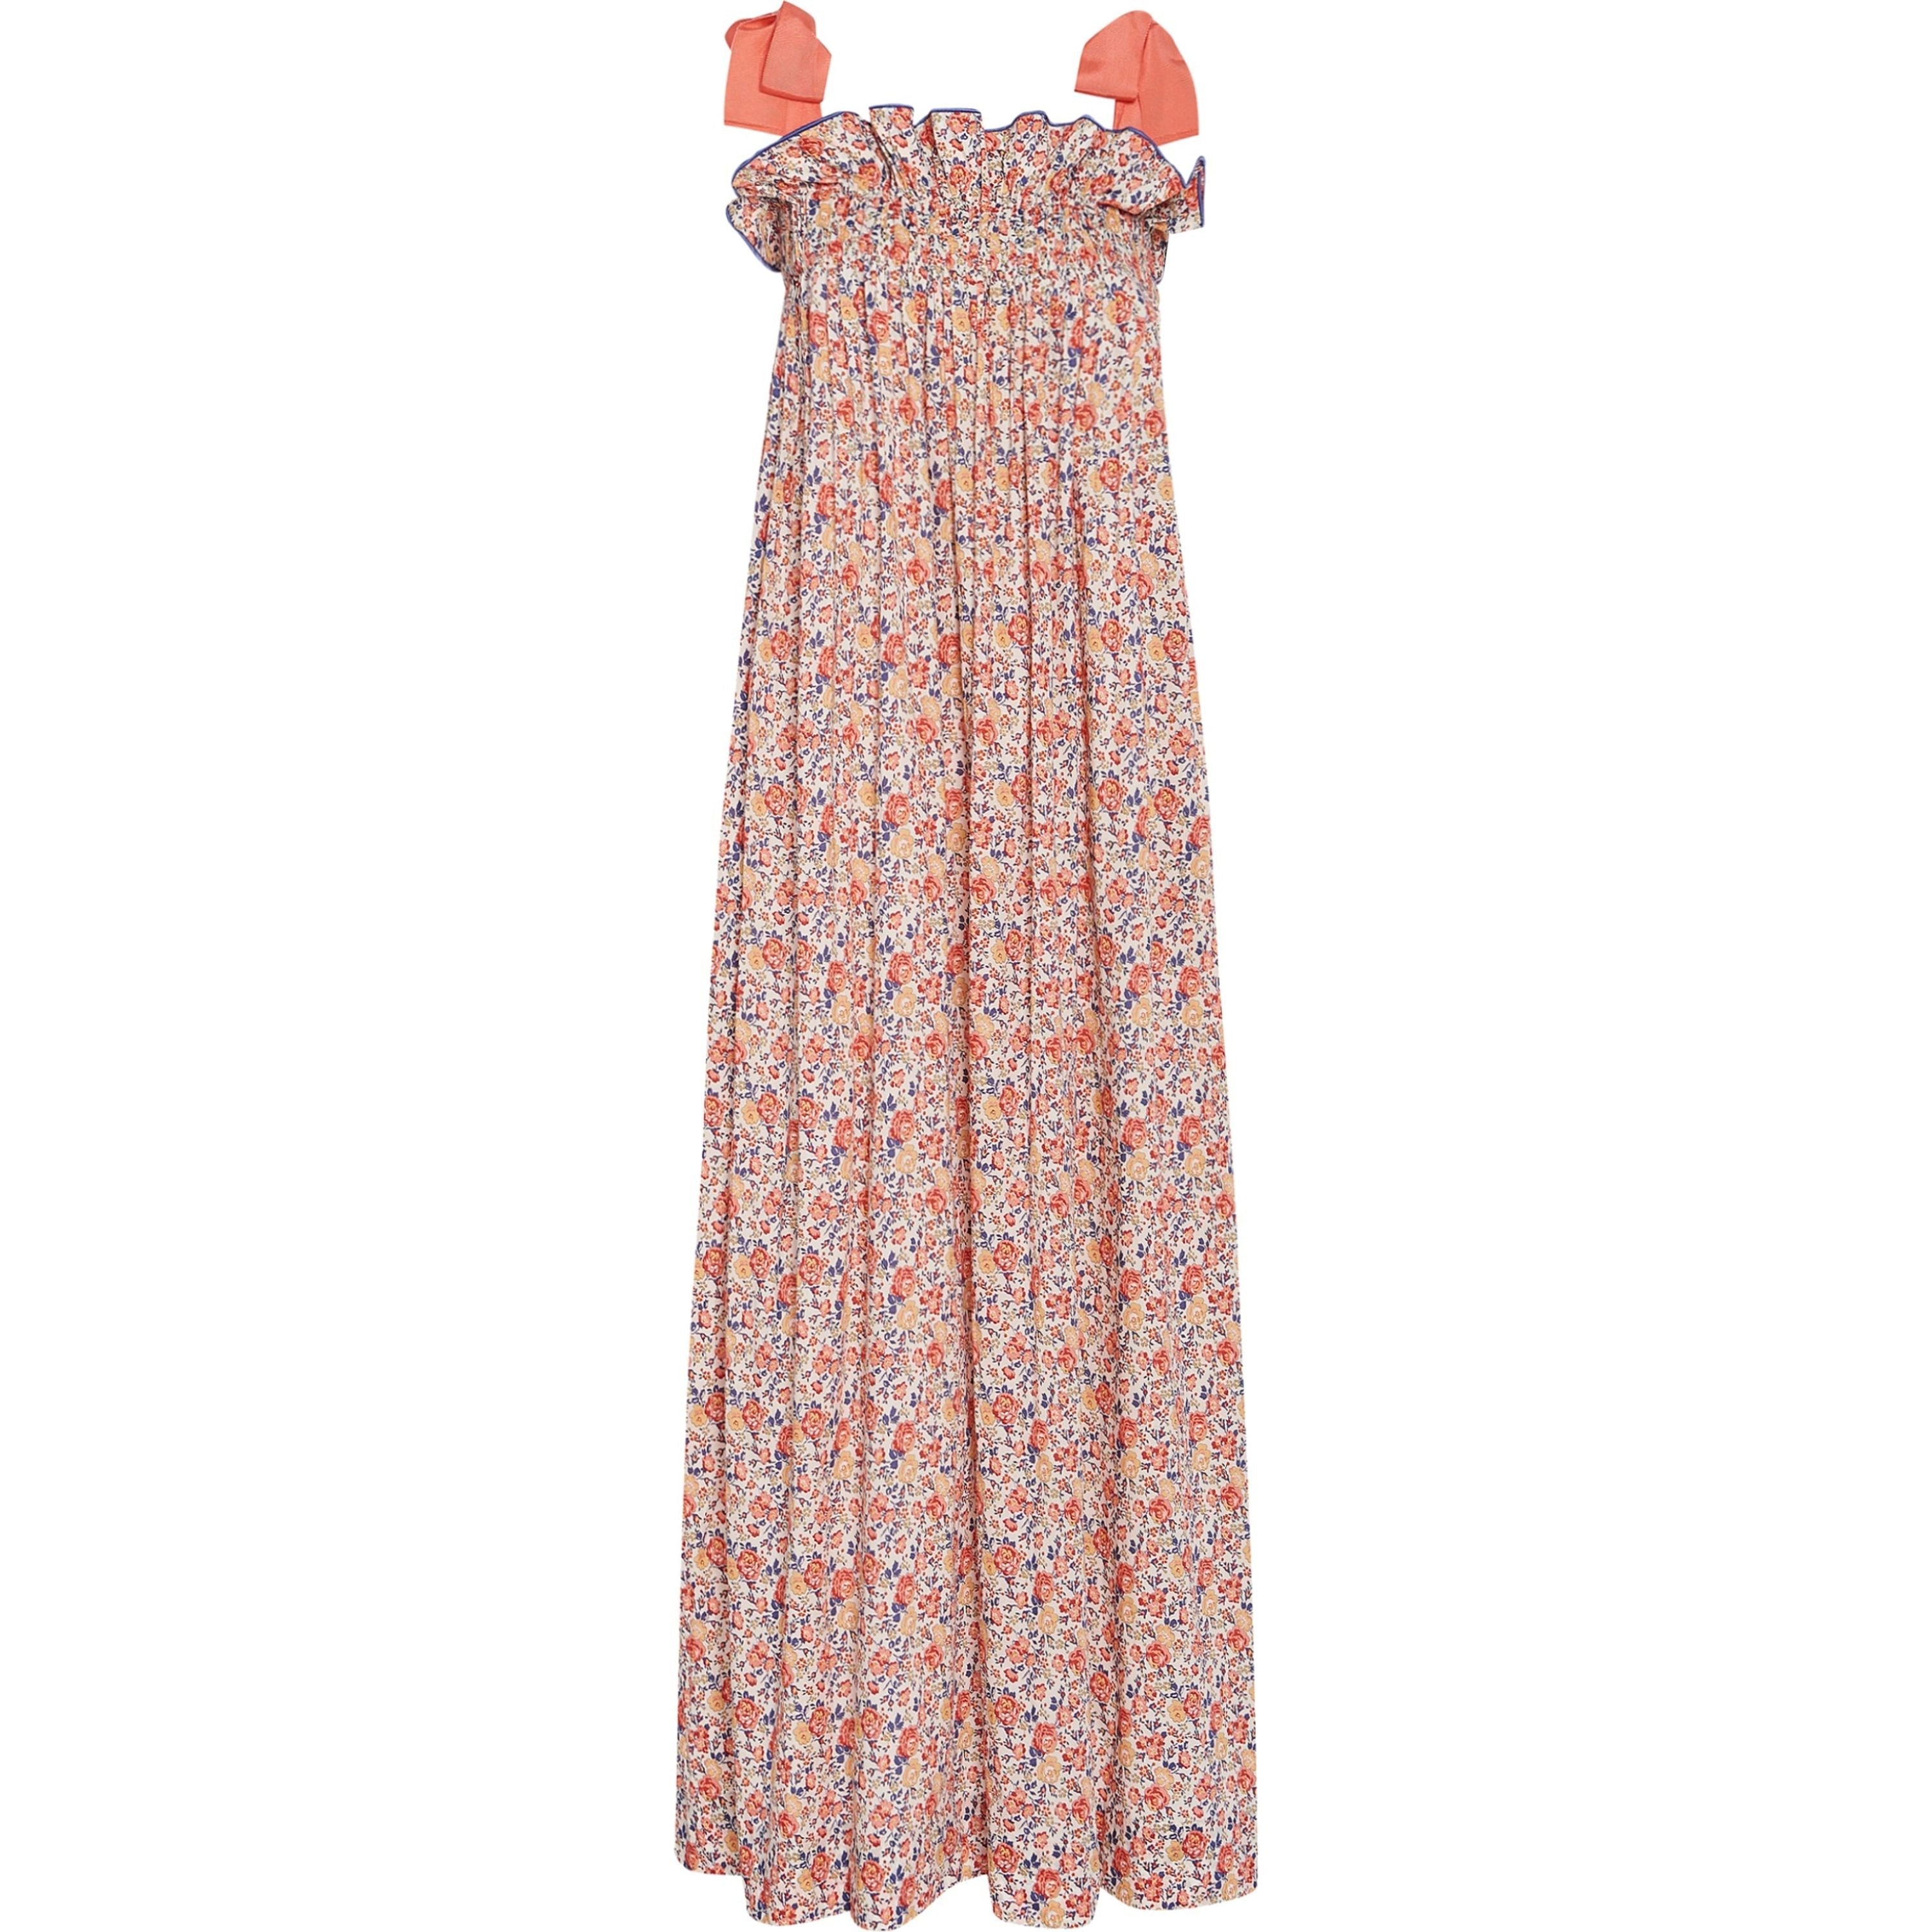 Women's Jaime Dress in Coral Floral by Casey Marks